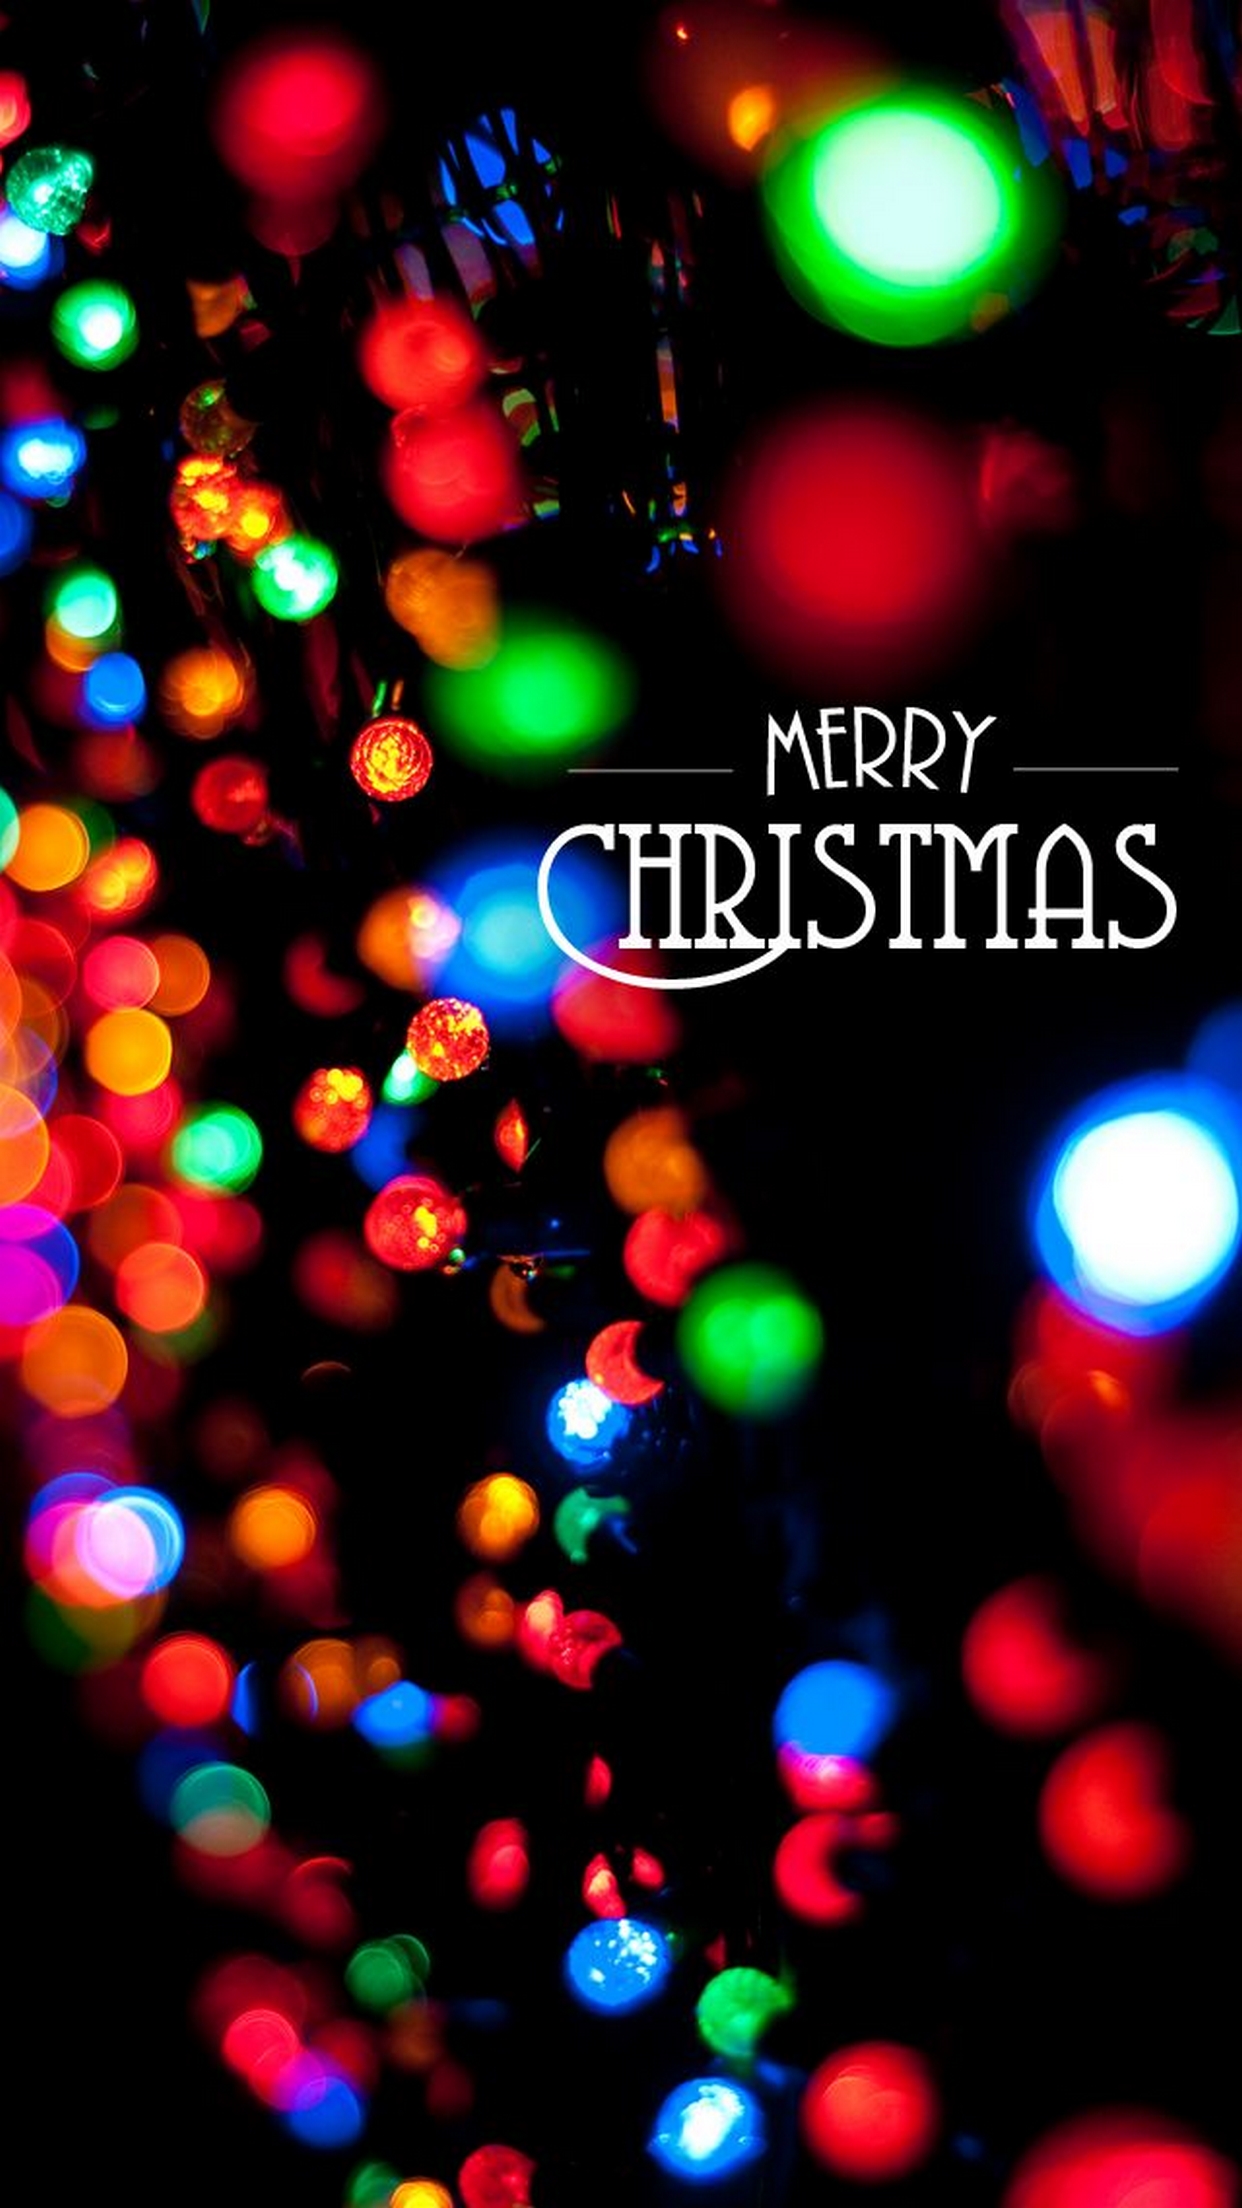 110 Christmas iPhone Wallpapers For Free - InspirationSeek.com